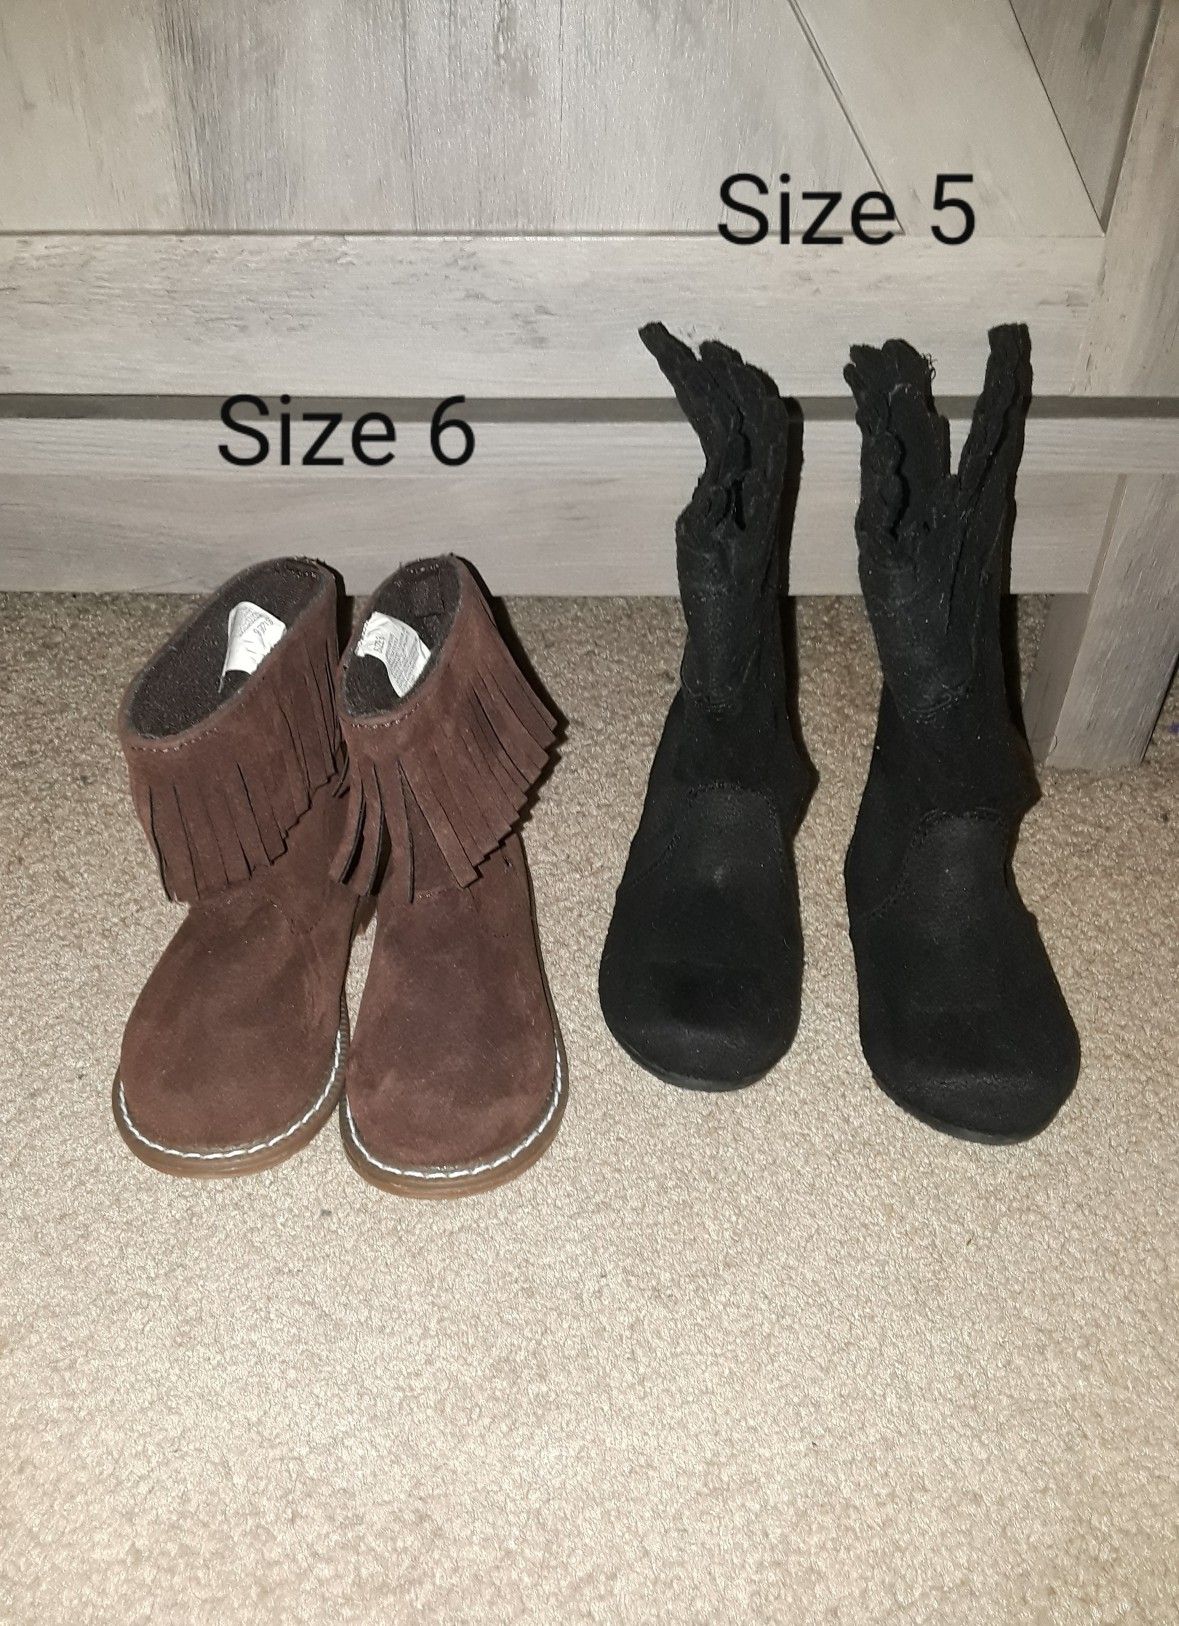 Toddler boots FALL WINTER like new size 5 & 6